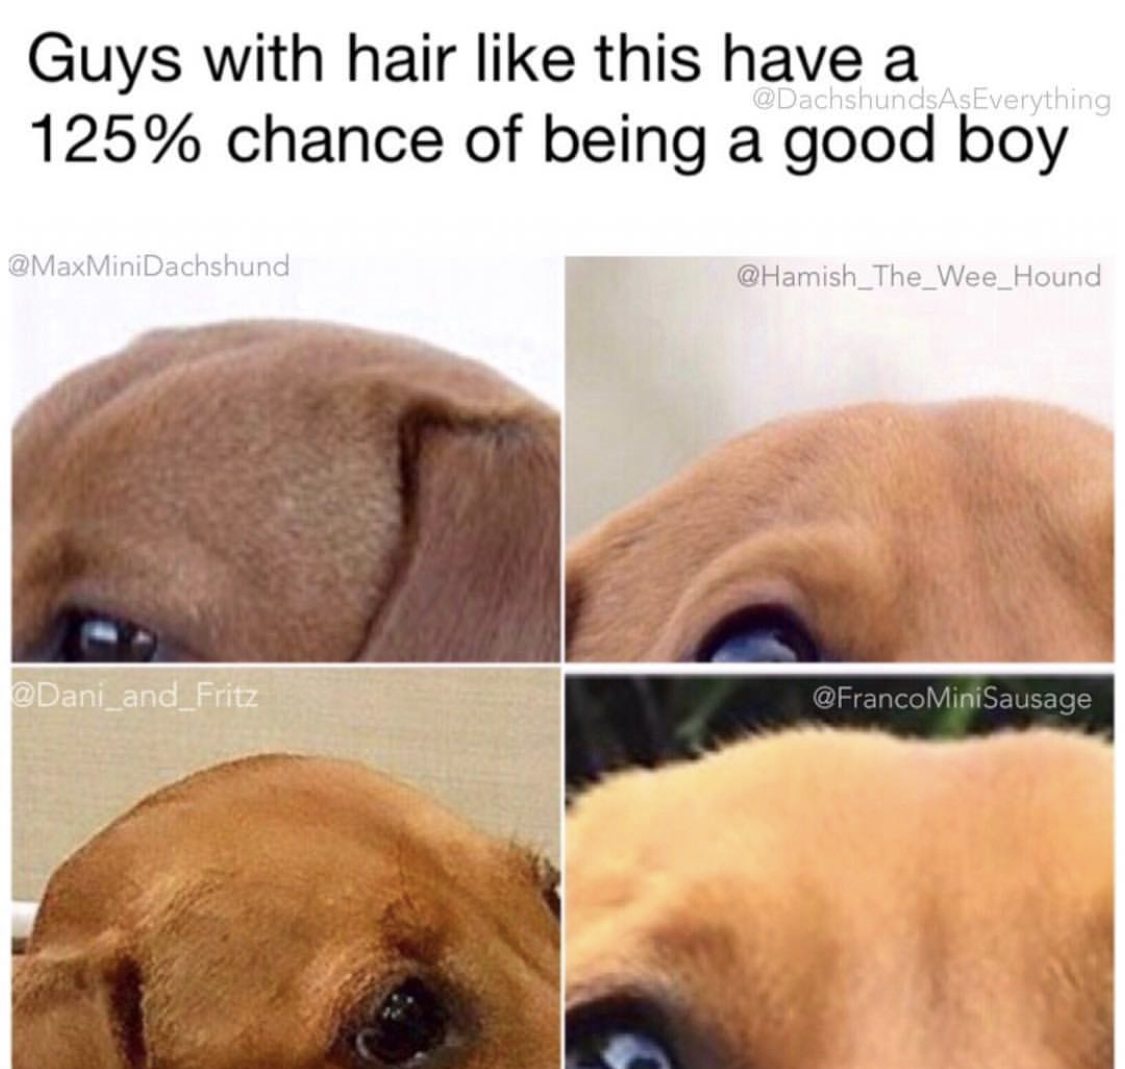 four photos of a Dachshund's head with caption - Guys with hair like this have a125% chance of being a good boy